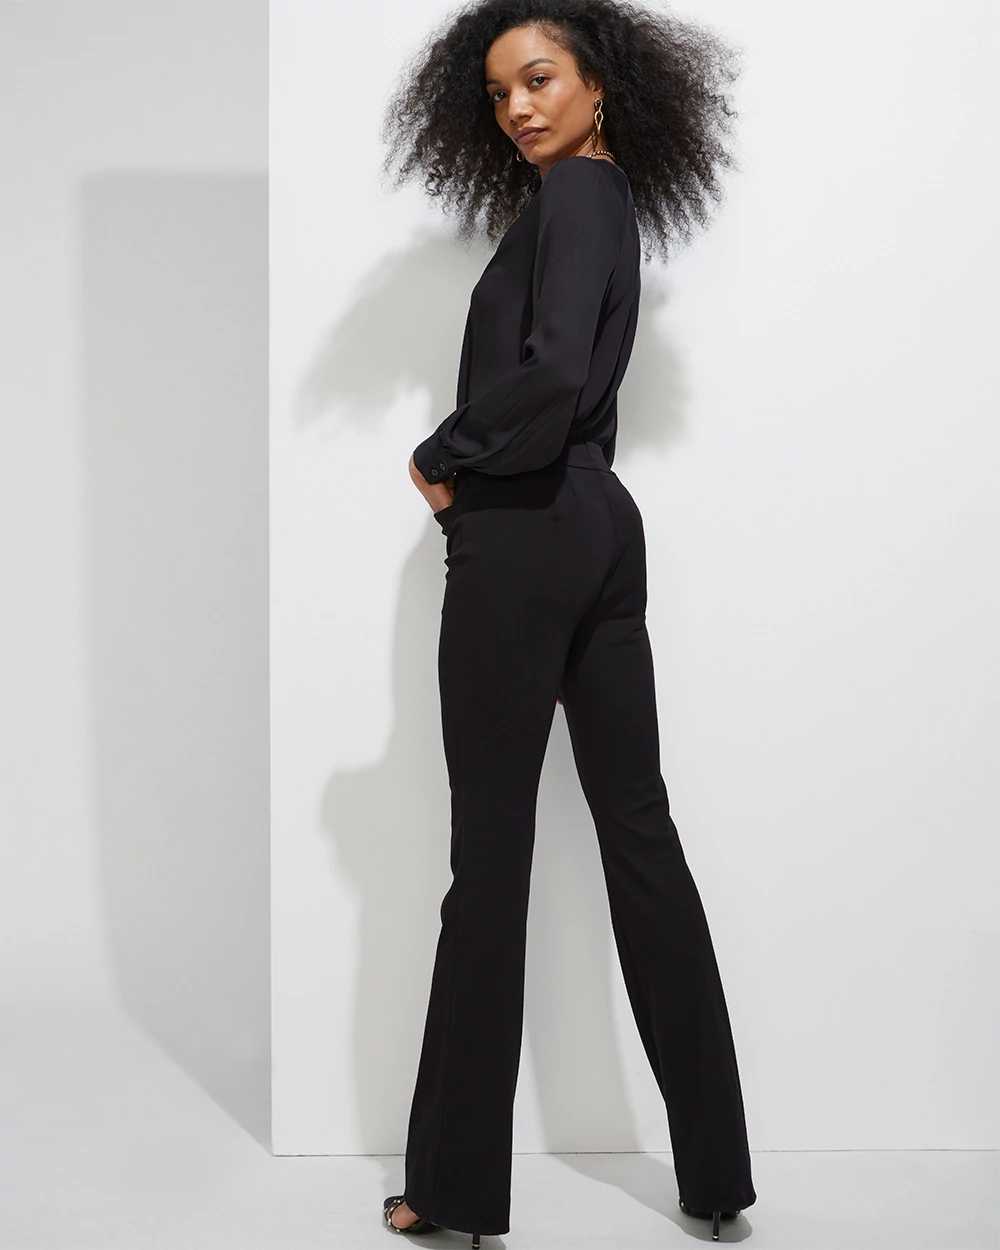 Outlet WHBM Pull-On Skinny Flare Pants click to view larger image.